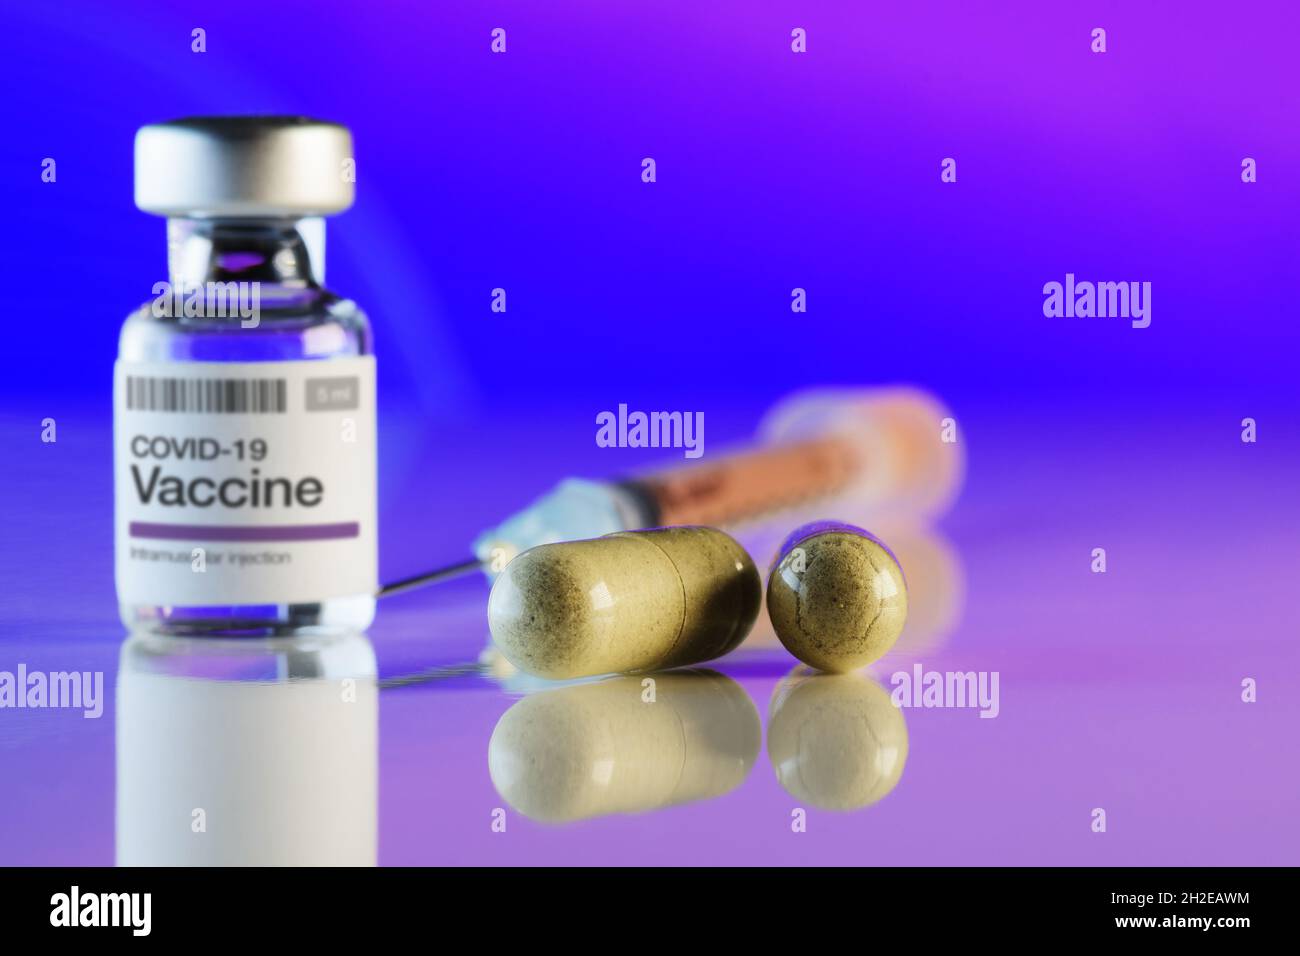 Close-up of two capsules with alternative medicine, COVID-19 vaccine vial and syringe in background. Alternative medicine, vaccination, Covid-19, phar Stock Photo